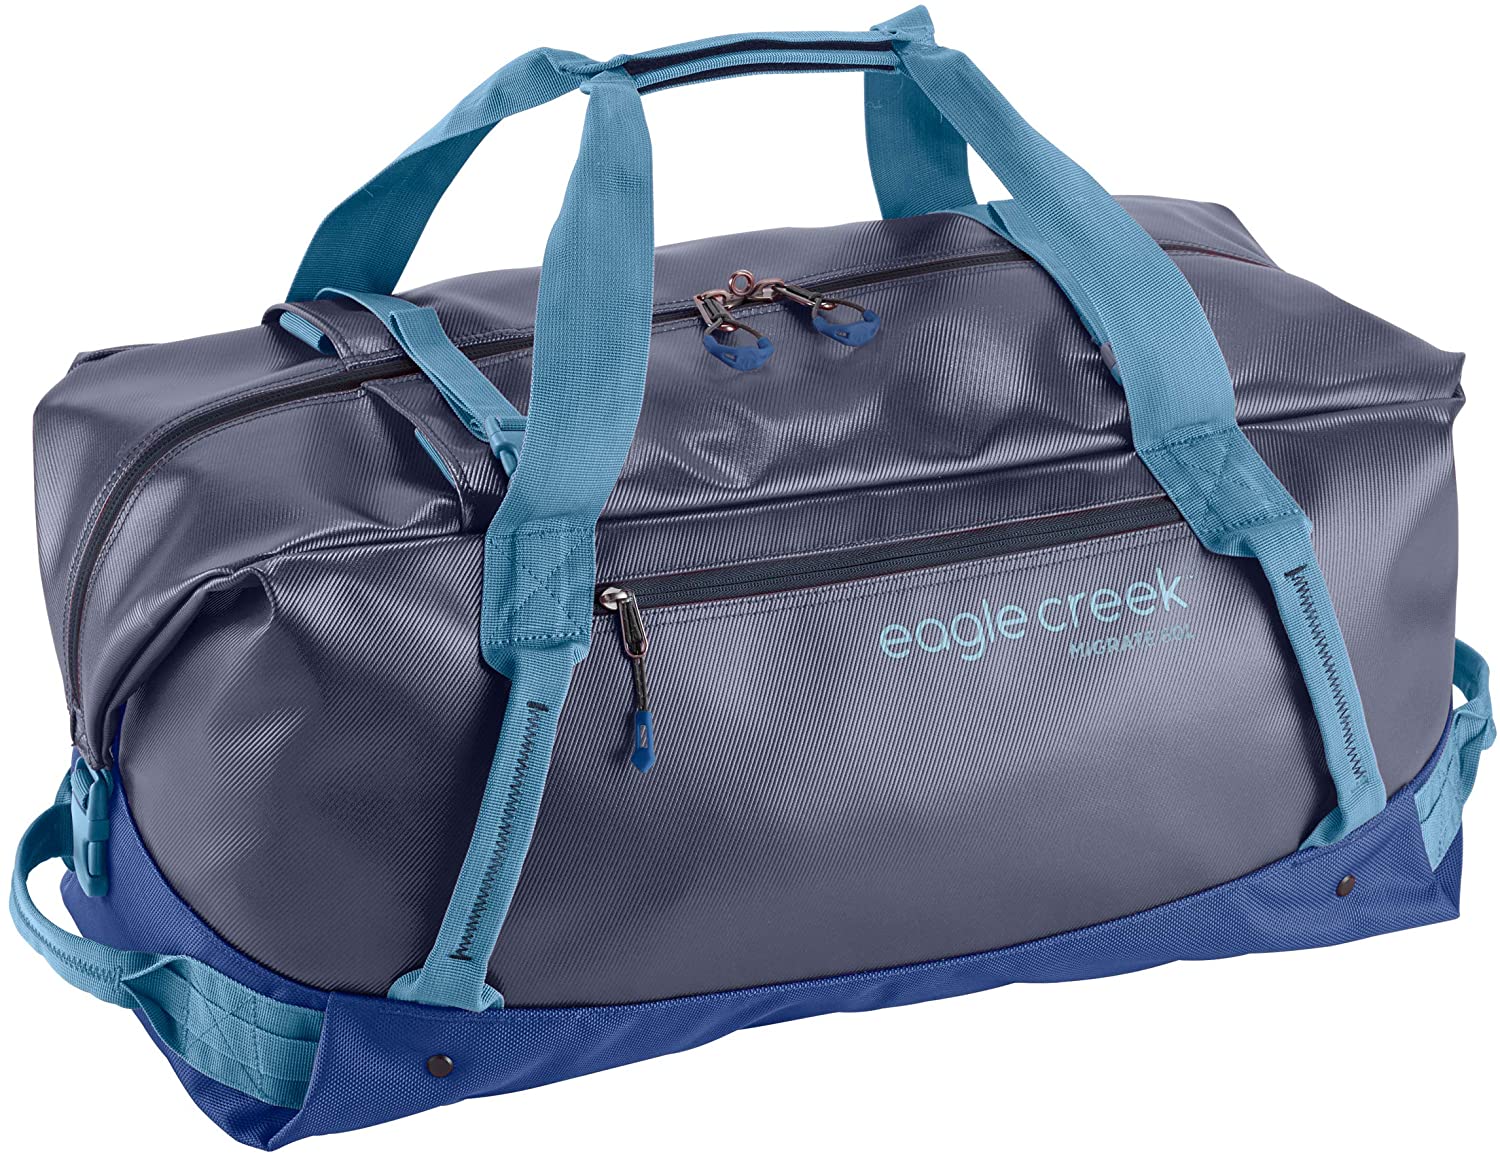 Eagle Creek Migrate Duffel 60L in Arctic Blue color from the front